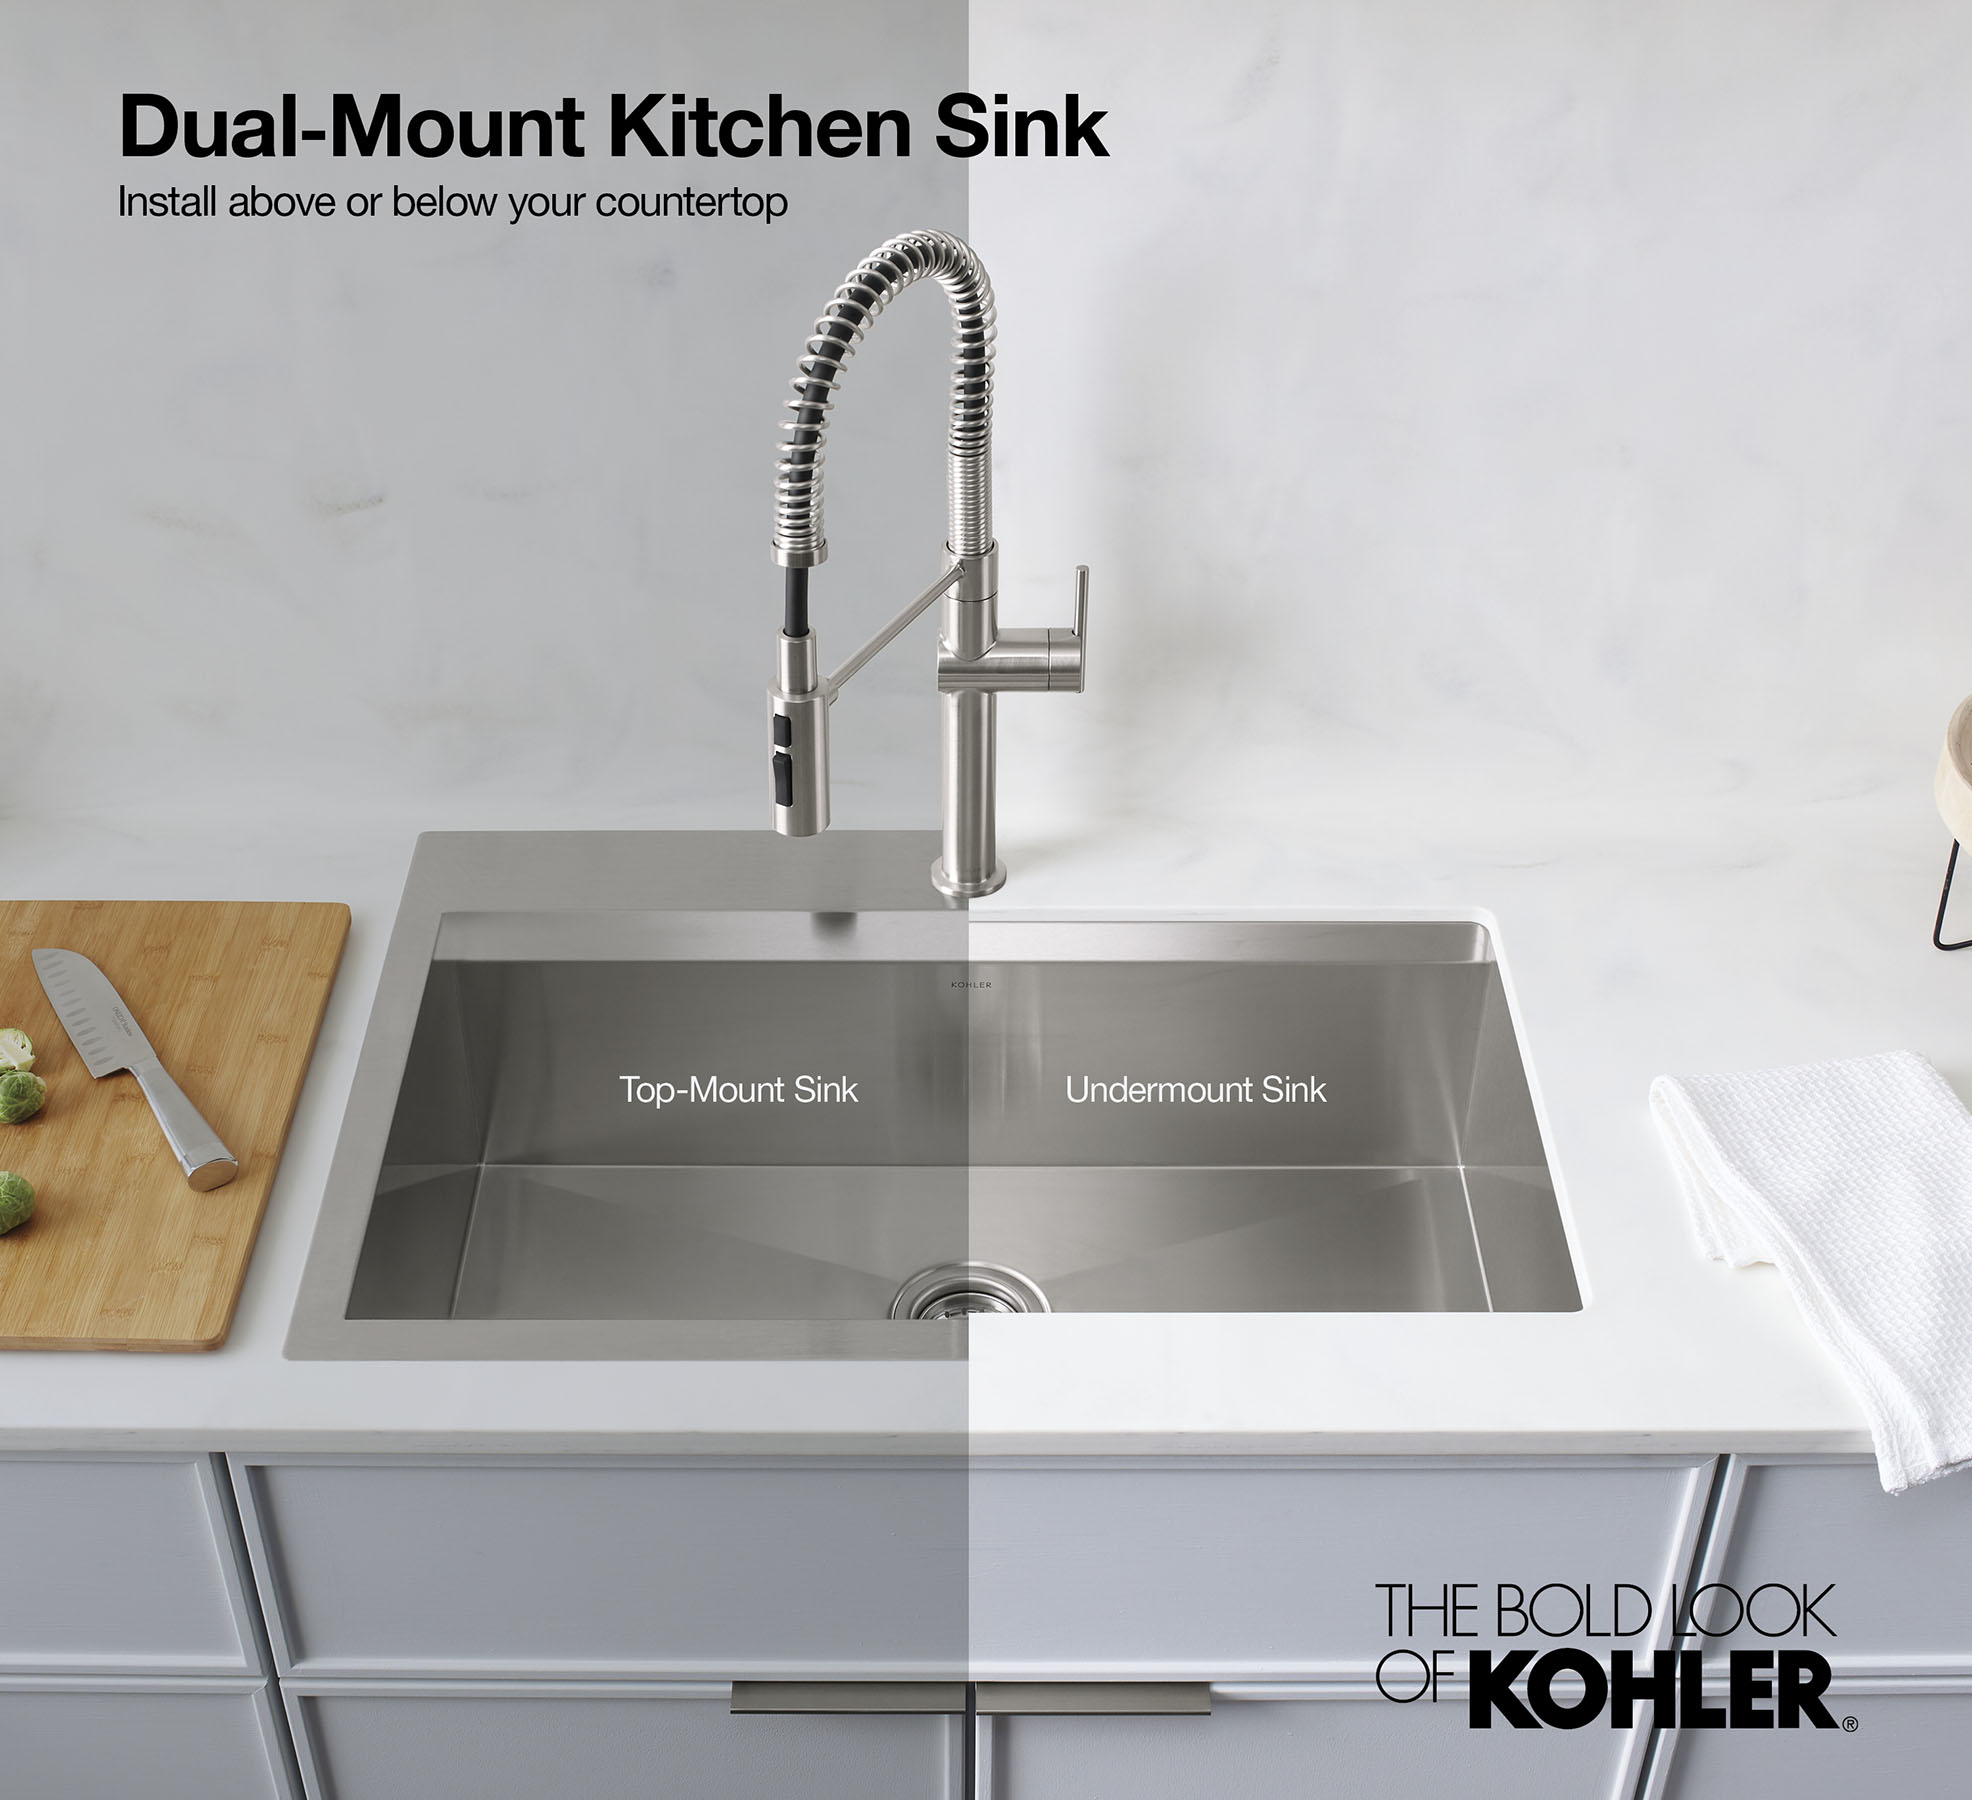 De'Longhi All in One Combination … curated on LTK